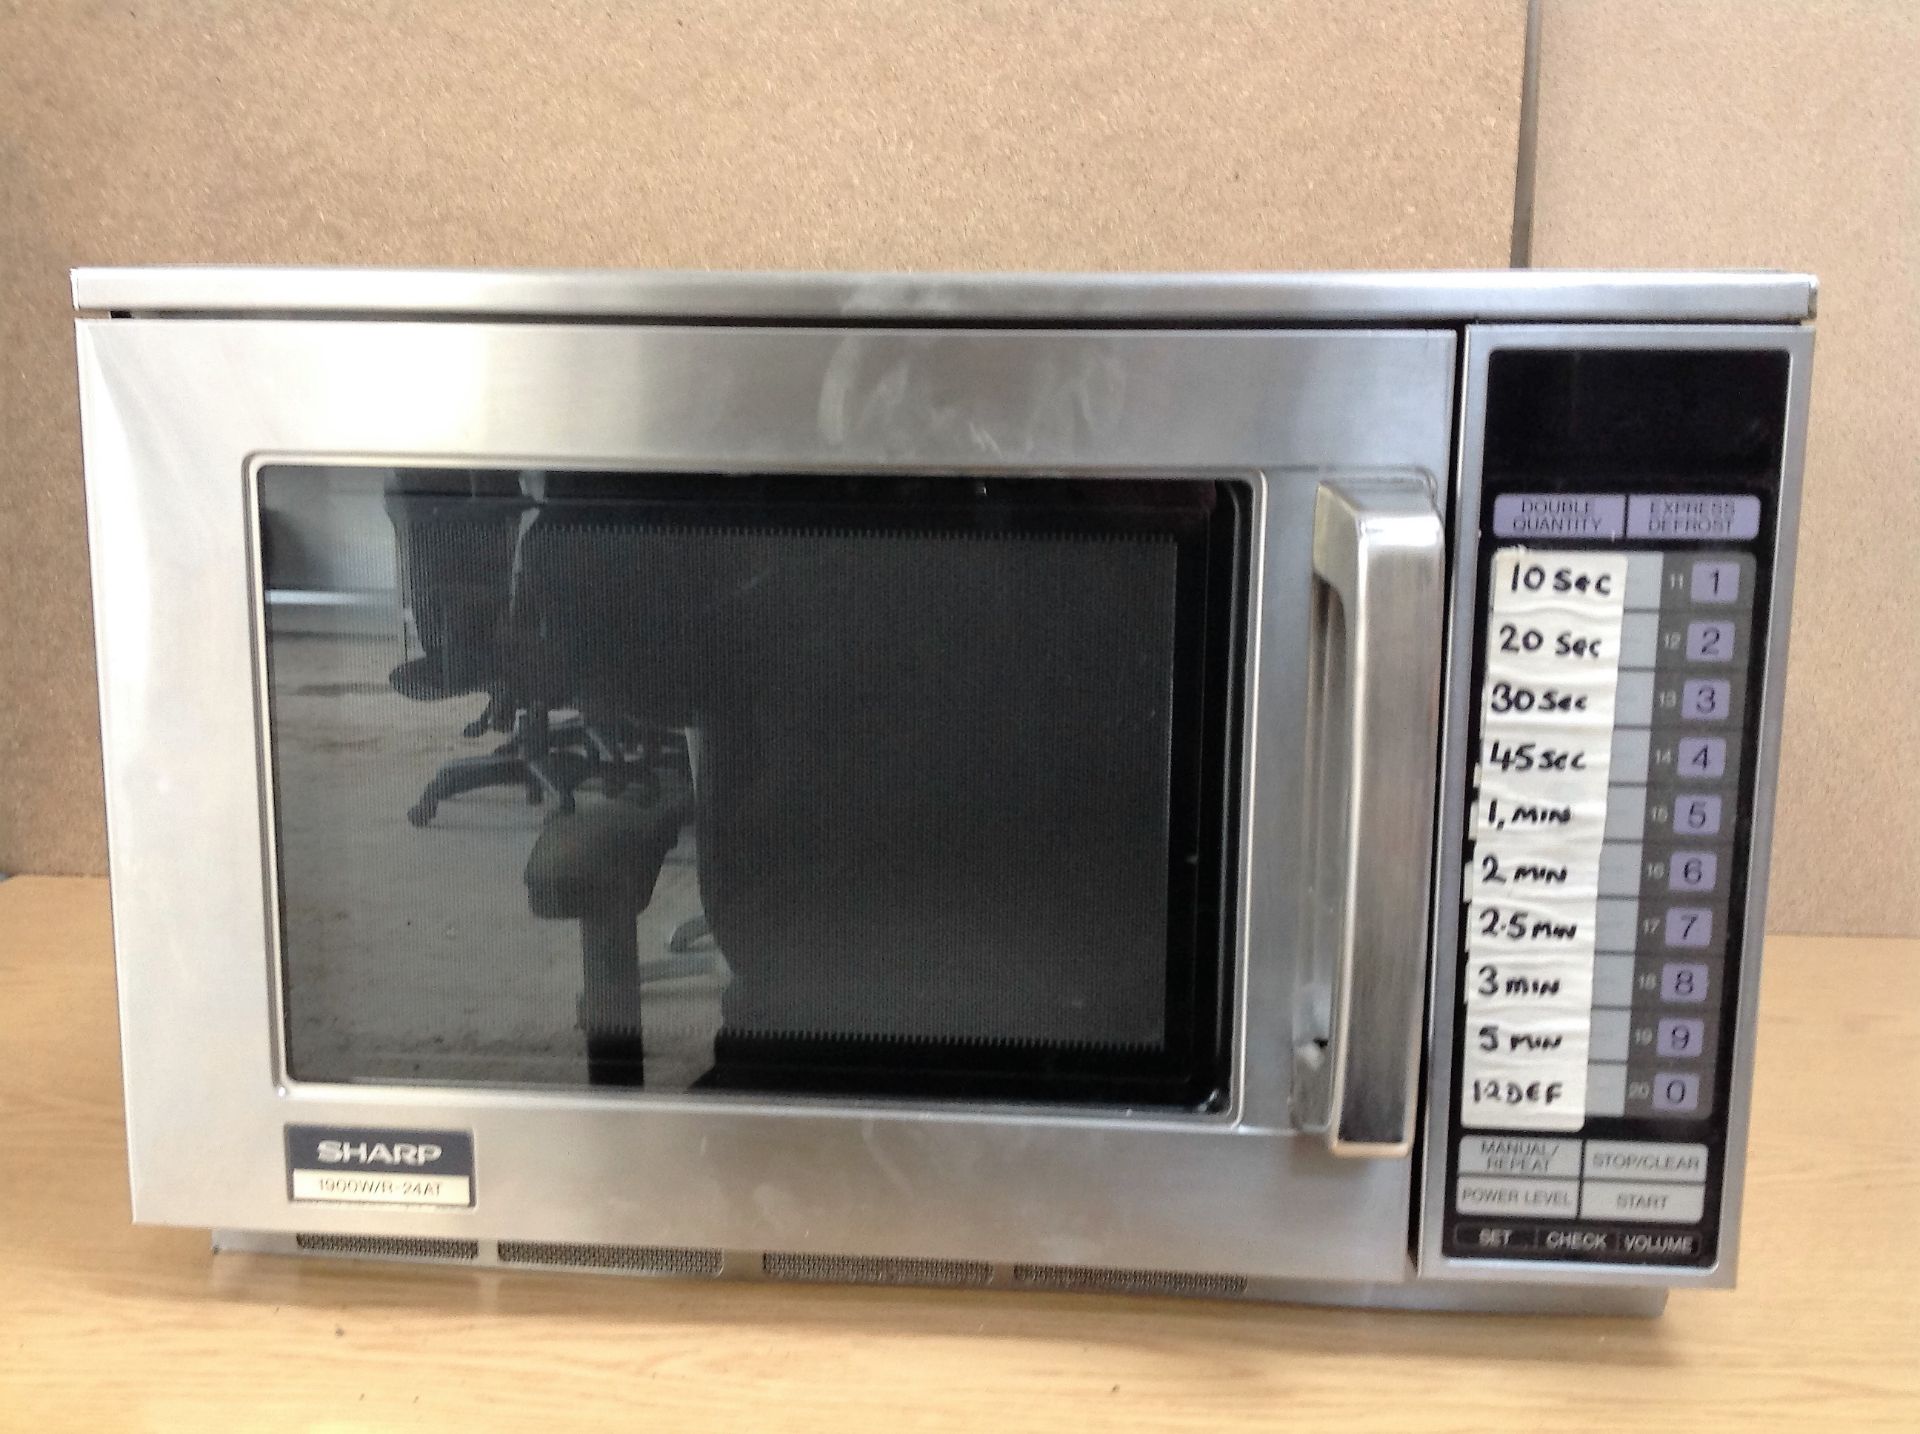 Sharp Commercial Stainless Steel Microwave Oven- Model: 1900W/R 24AT